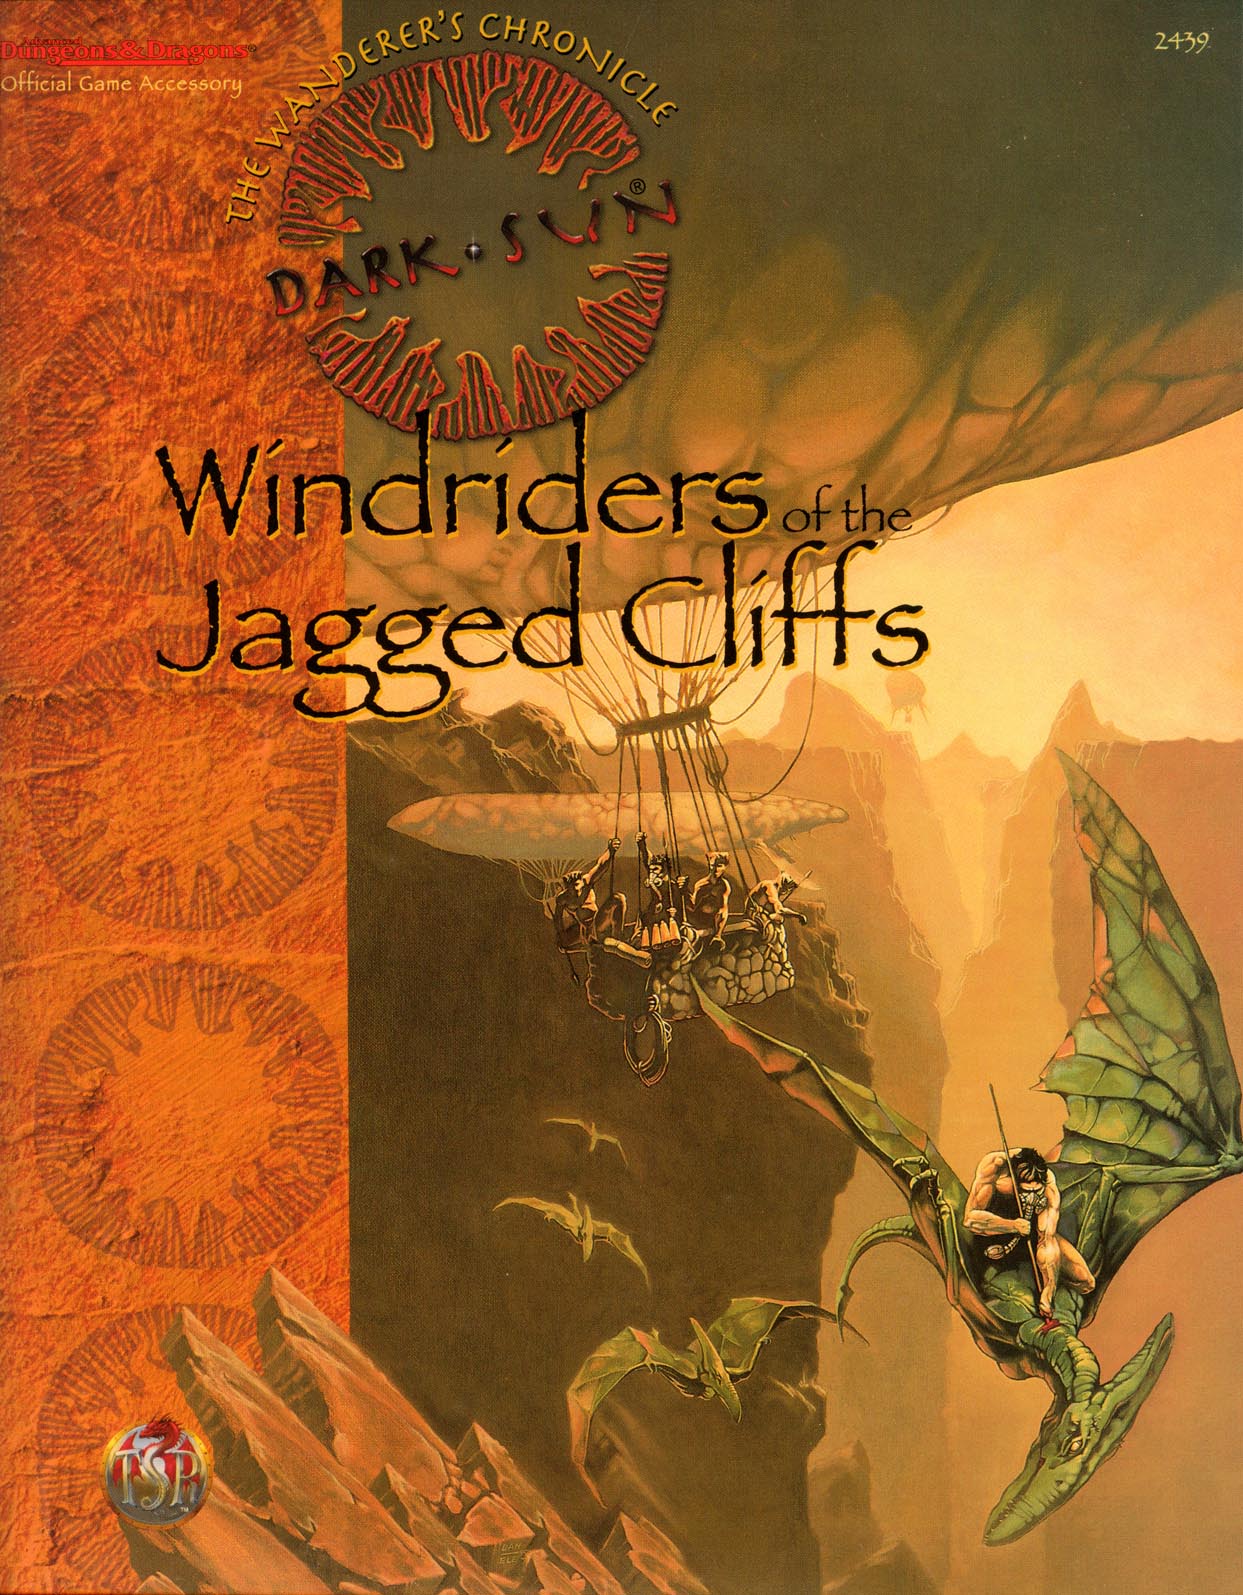 Windriders of the Jagged CliffsCover art